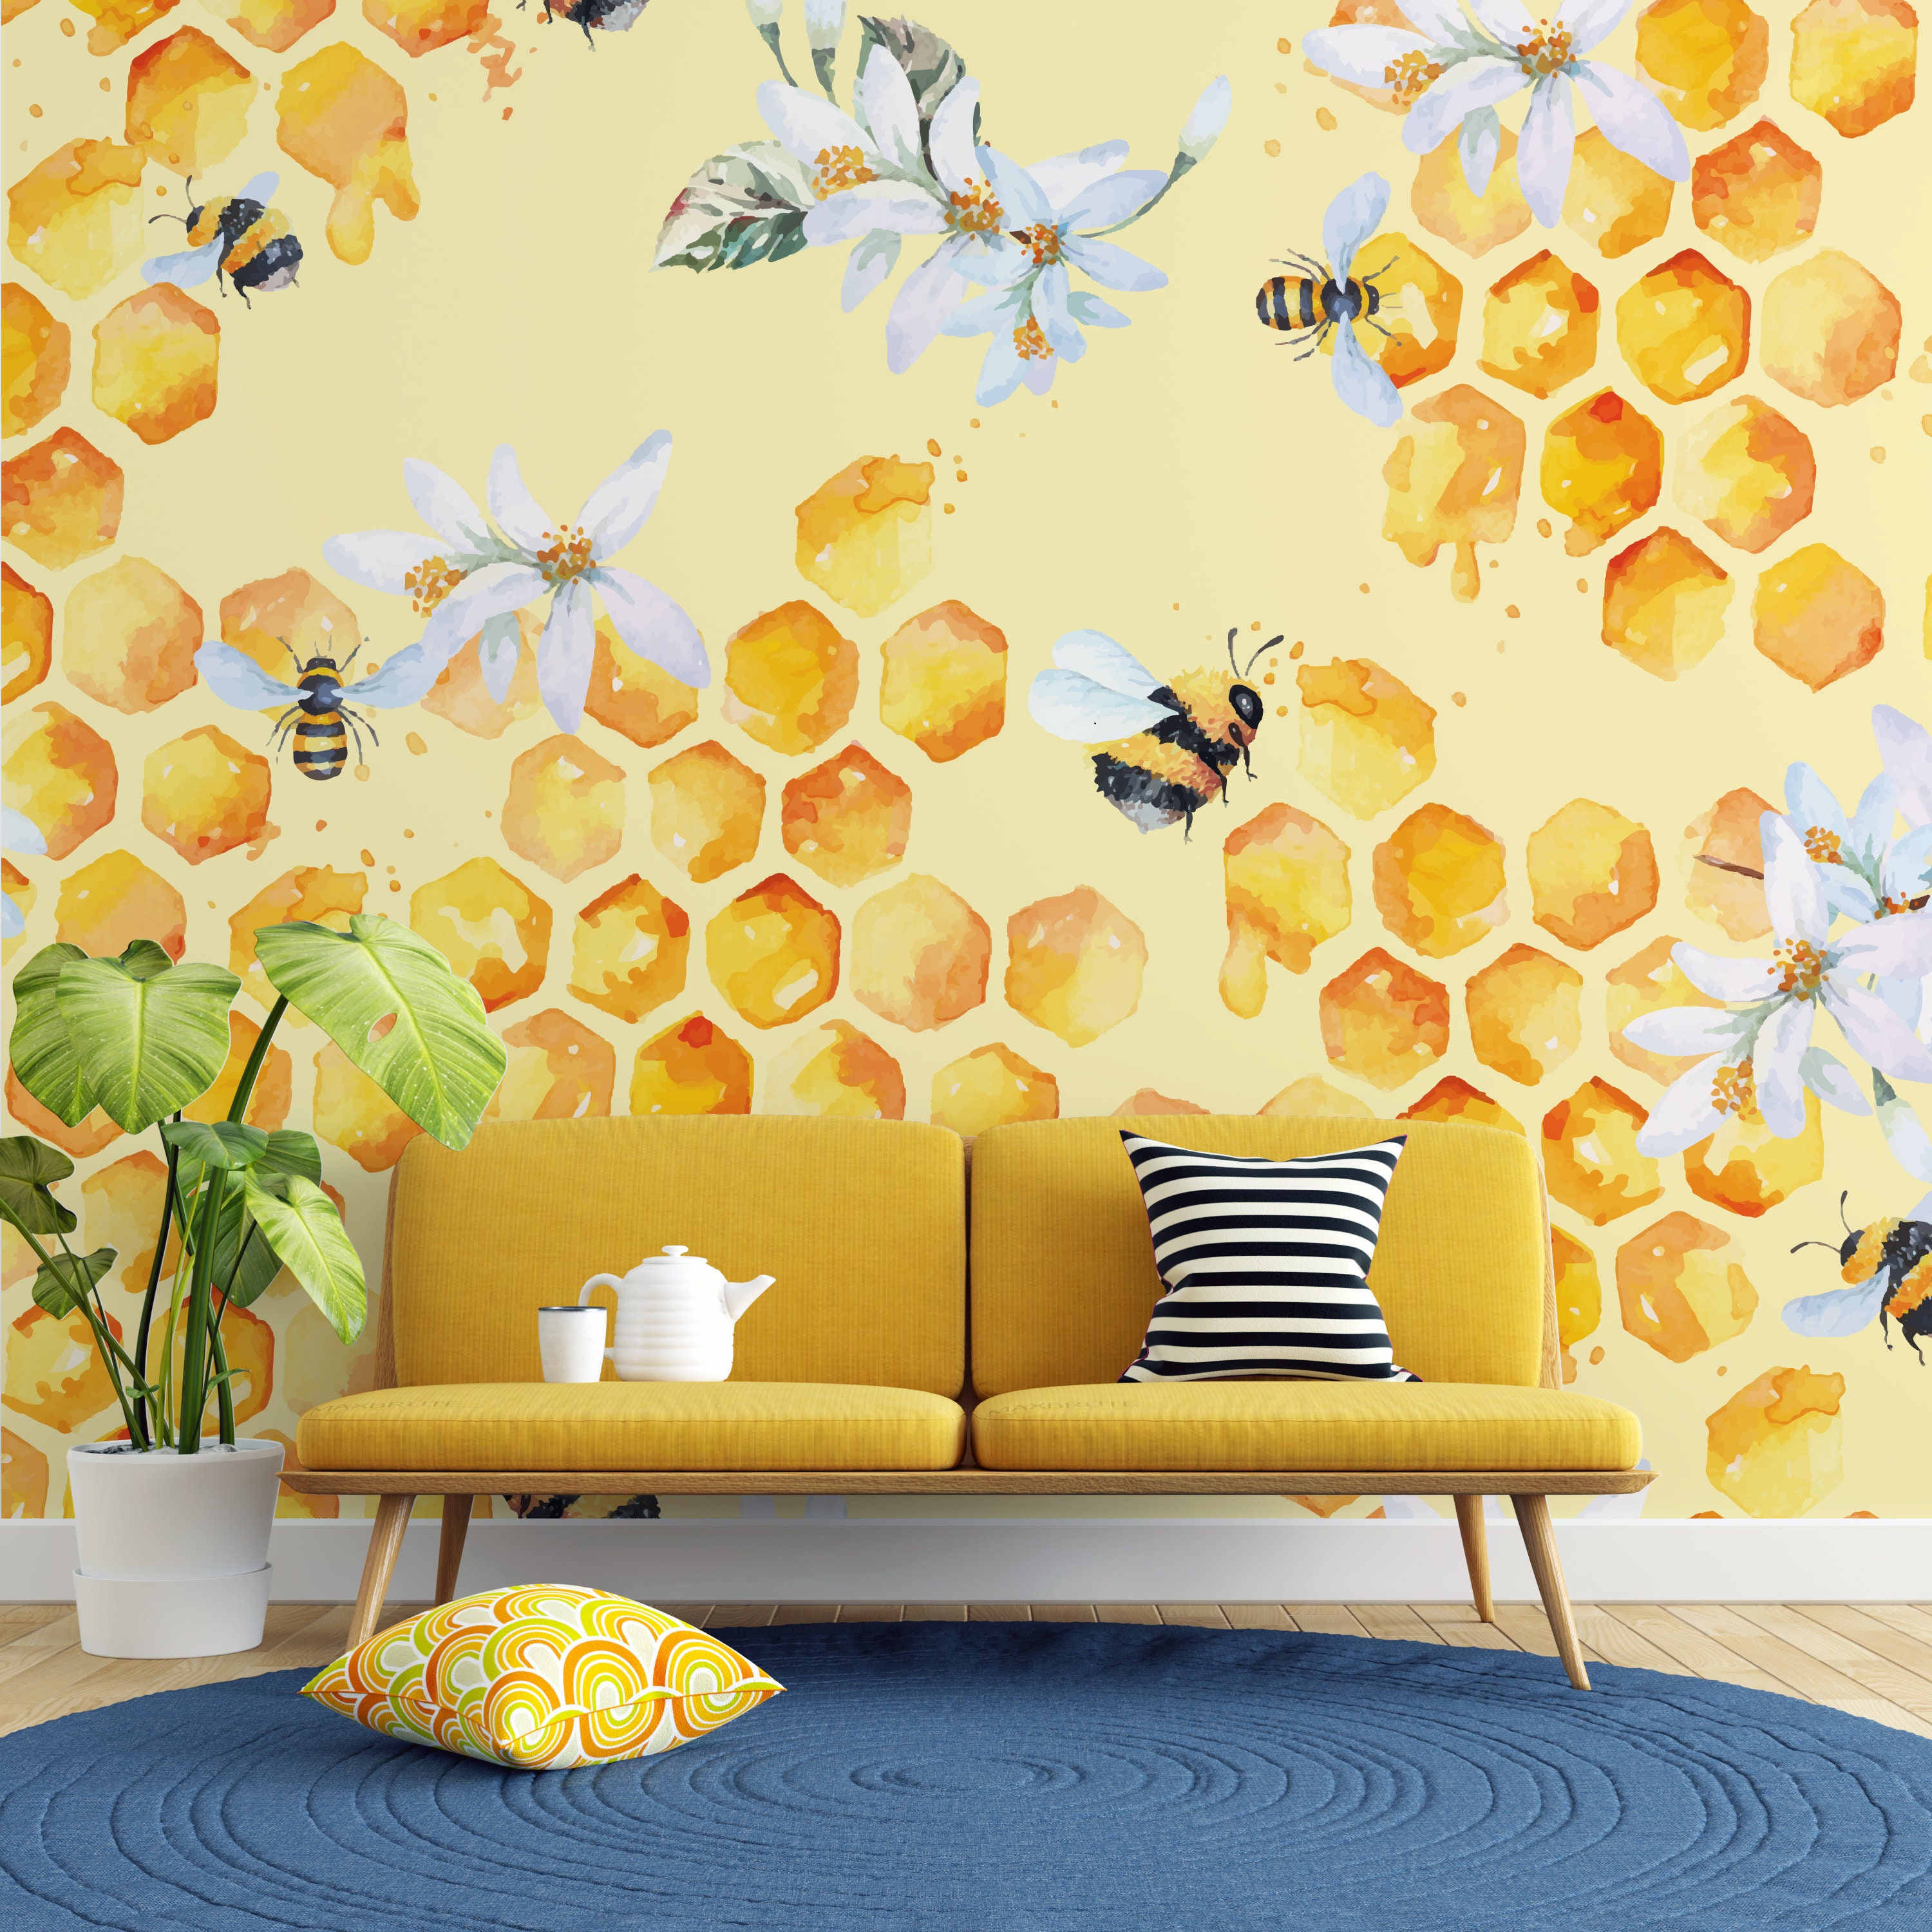 Bee Wallpaper , Peel and Stick Bees Repositionable Wall Decor , Bee Gifts , Bee  Decorations , Bee Decor for Home , Cheekywallmonkey © 